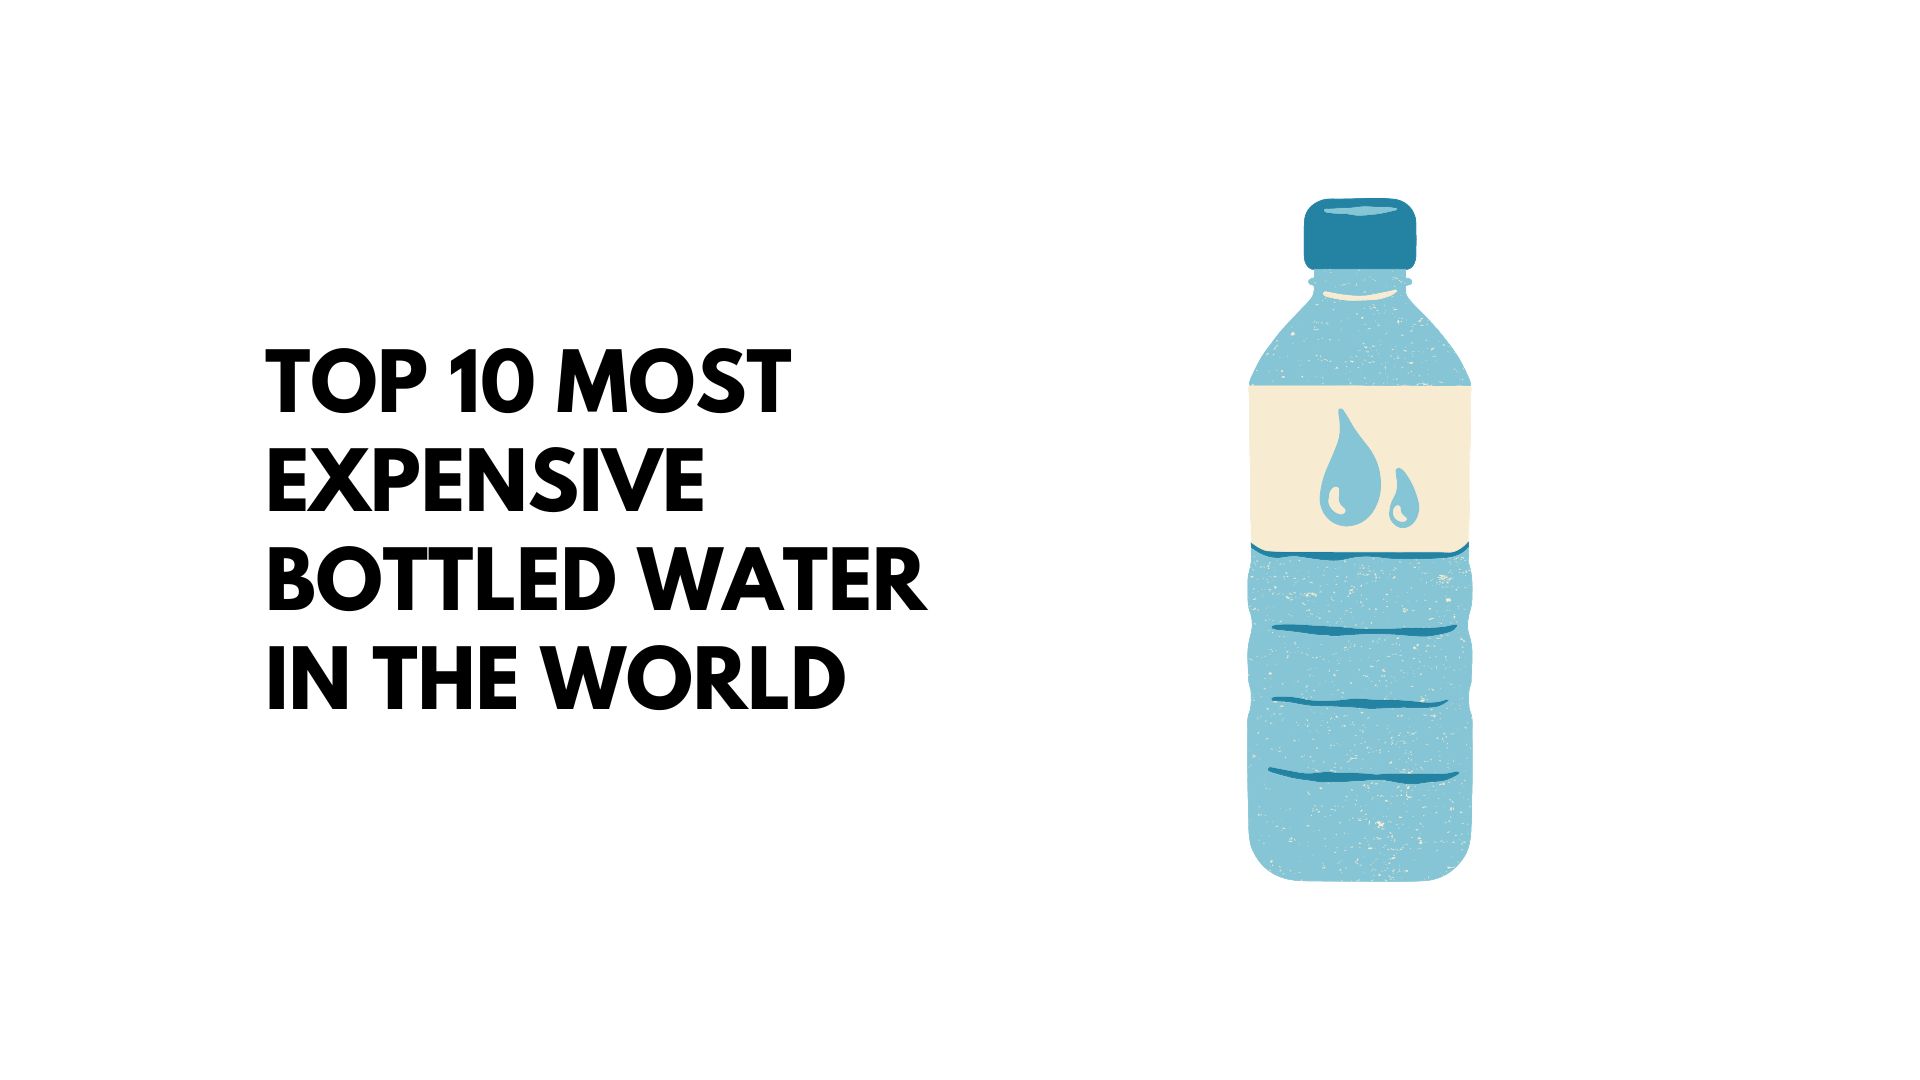 Top 10 Most Expensive Bottled Water in the World